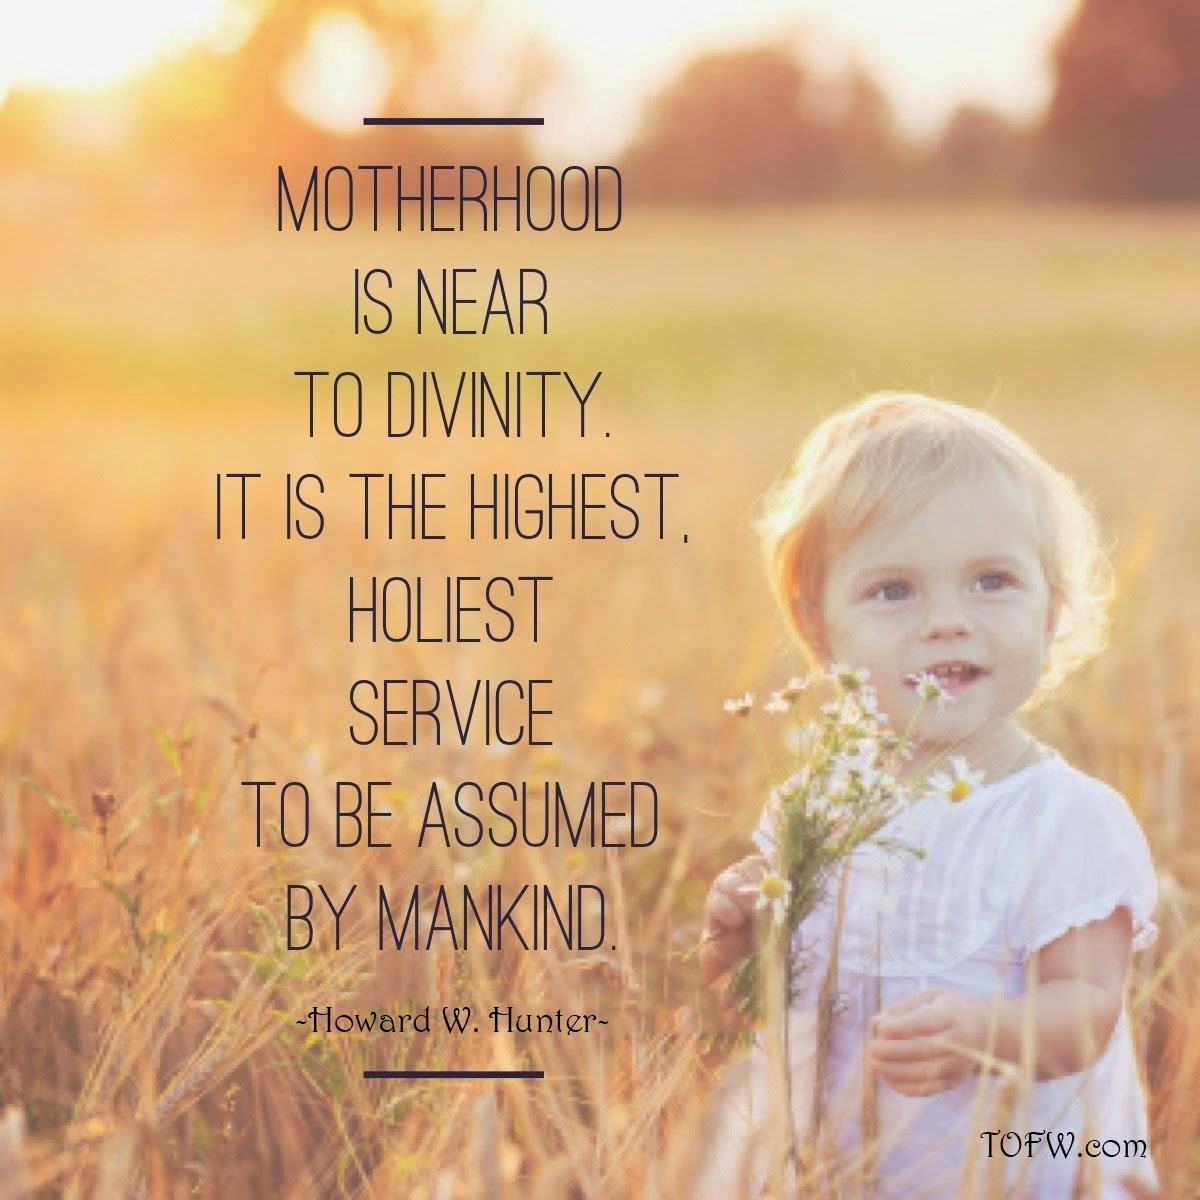 Quotes About Motherhood
 Some Inspiring Quotes To Start Your Day f